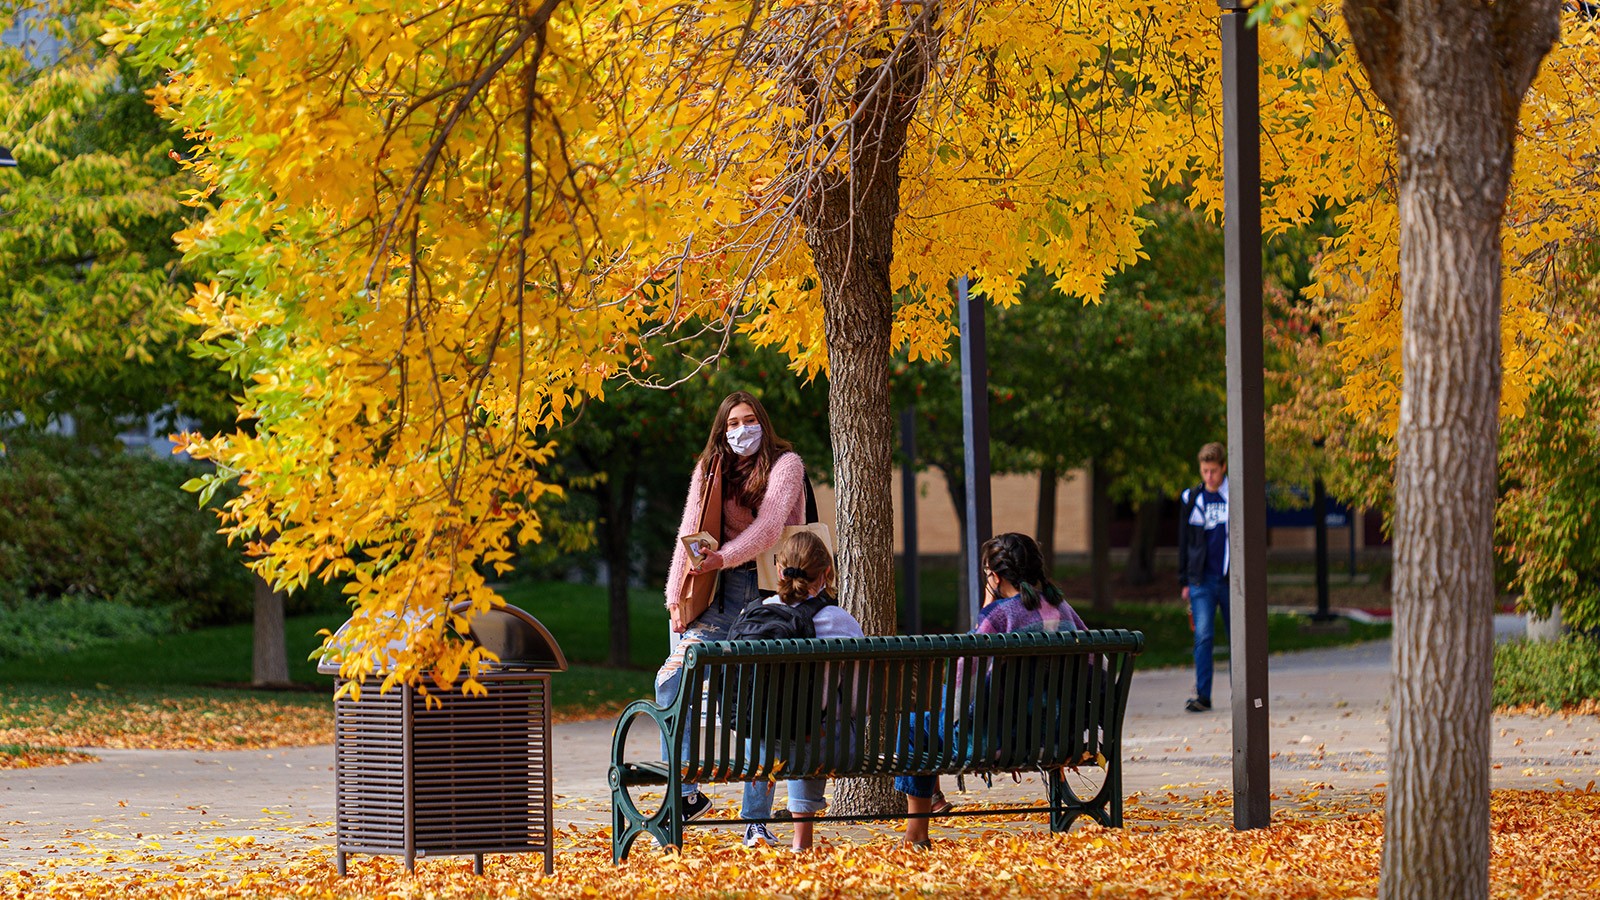 USU to Return to Primarily InPerson Activities for Fall 2021